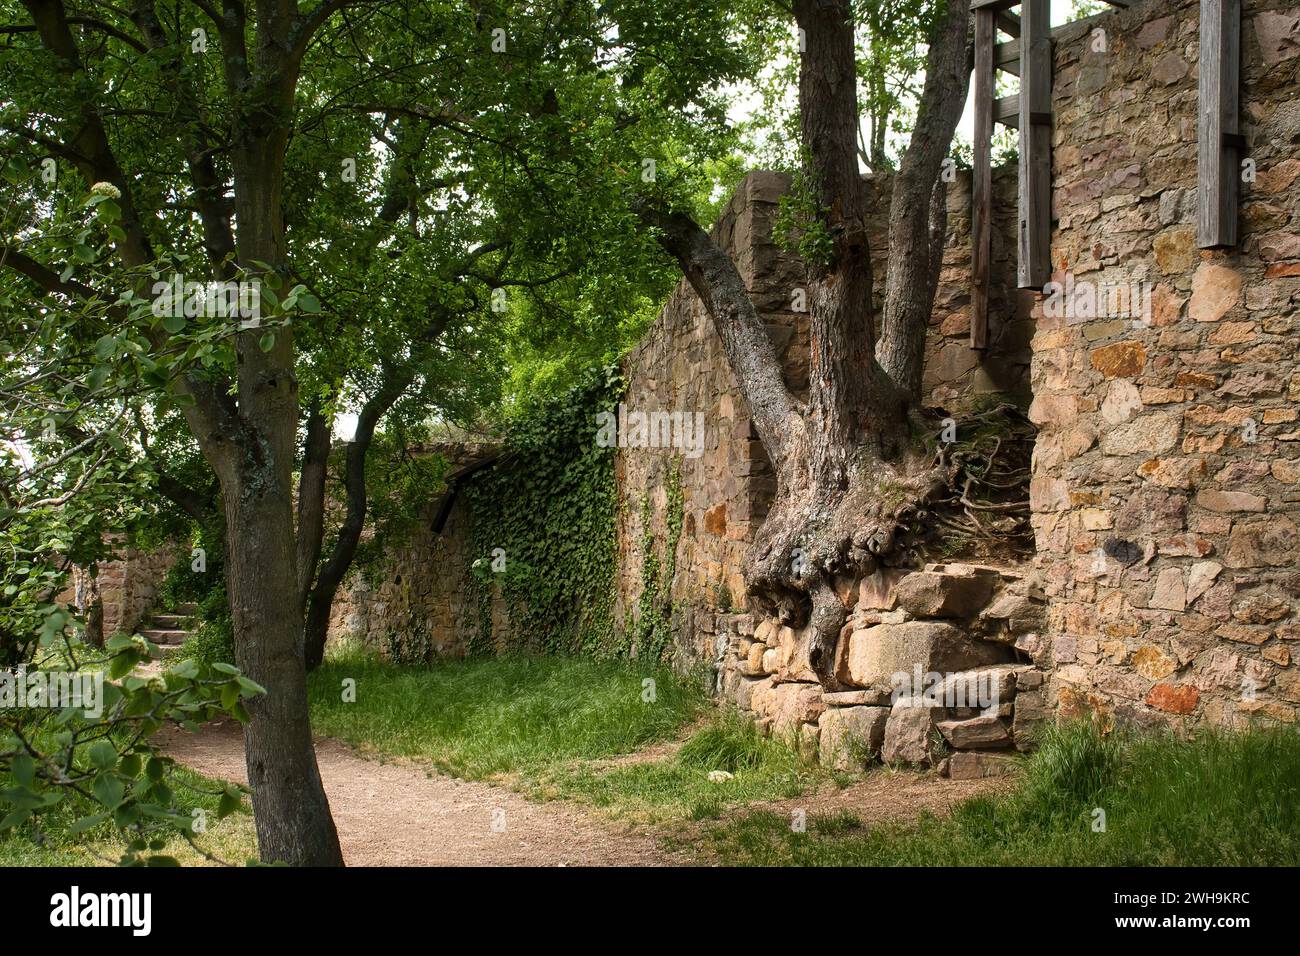 Tree growing out of wall around castle ruins inm Rhineland Palatinate, Germany on a spring day. Stock Photo